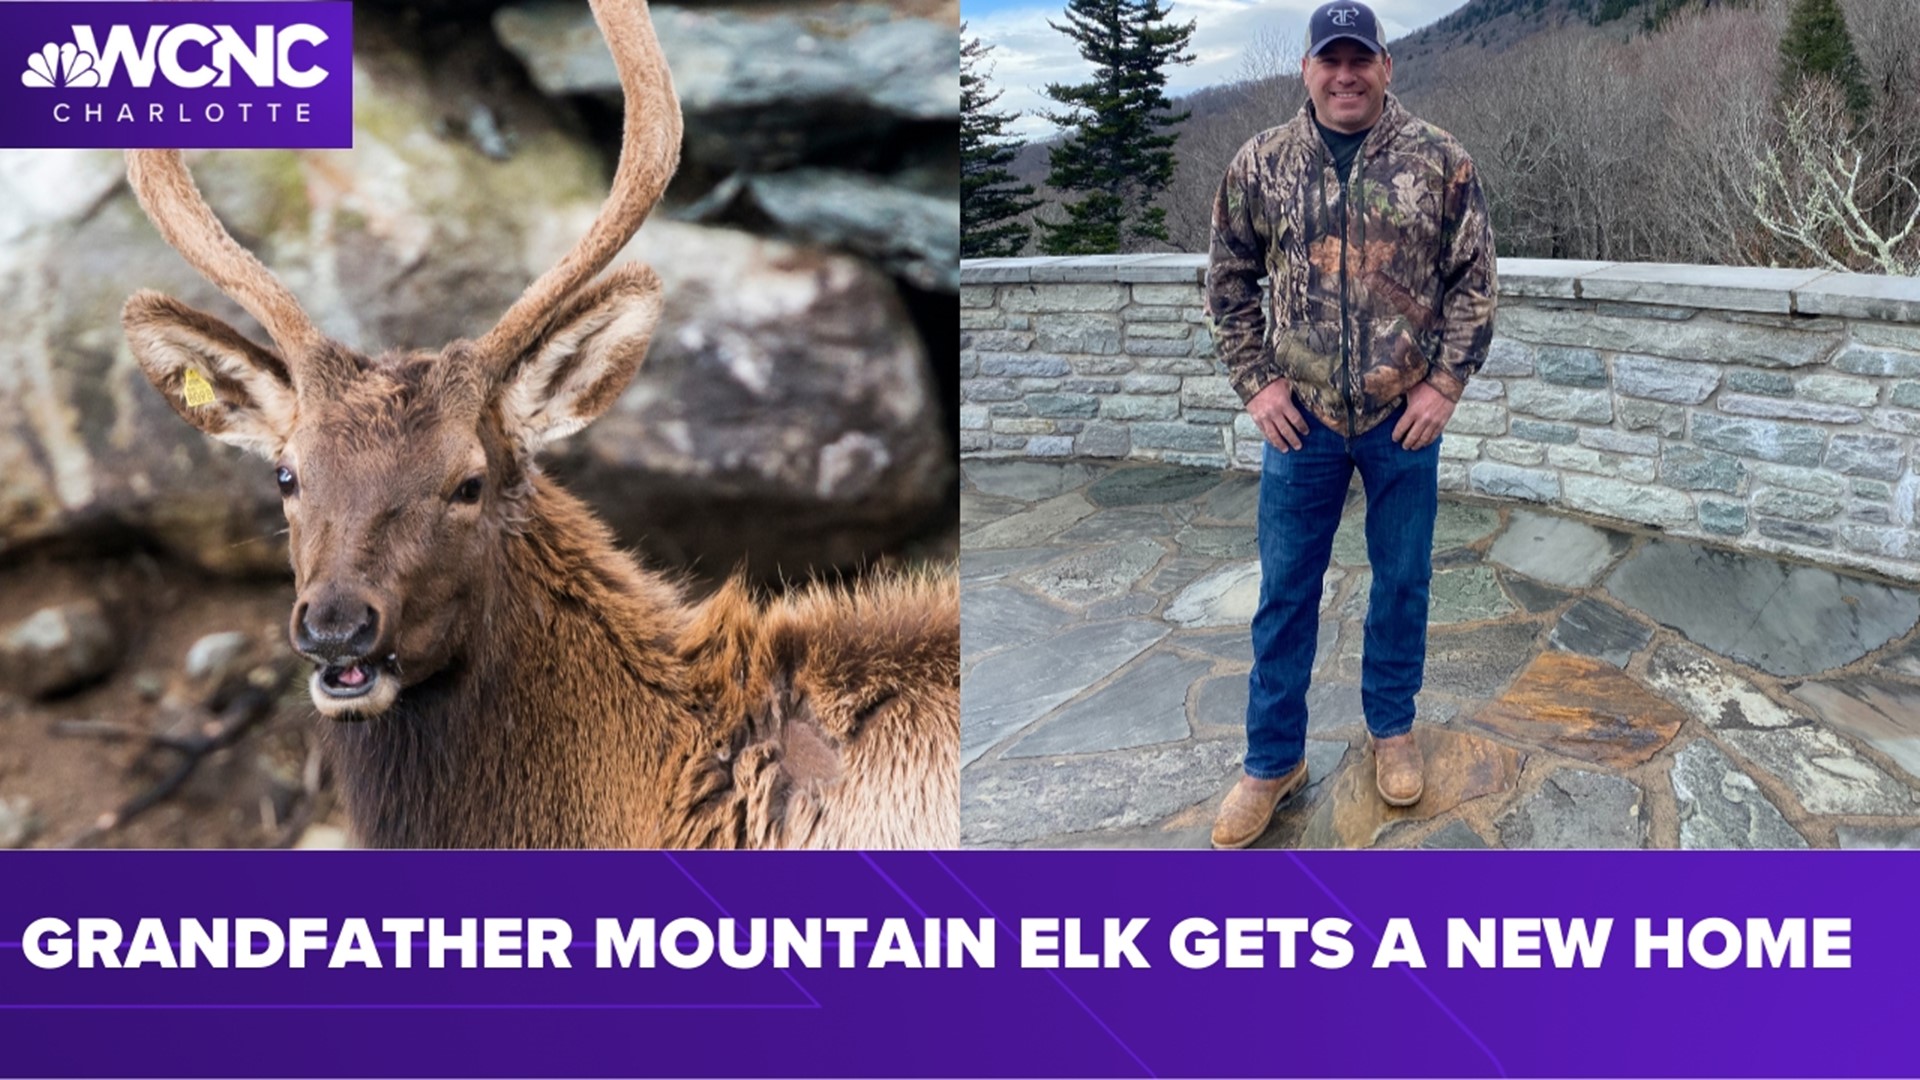 For the last year, three elk have been roaming about Grandfather Mountain near Linville. Now, one of them is getting a new home with NASCAR driver Ryan Newman.